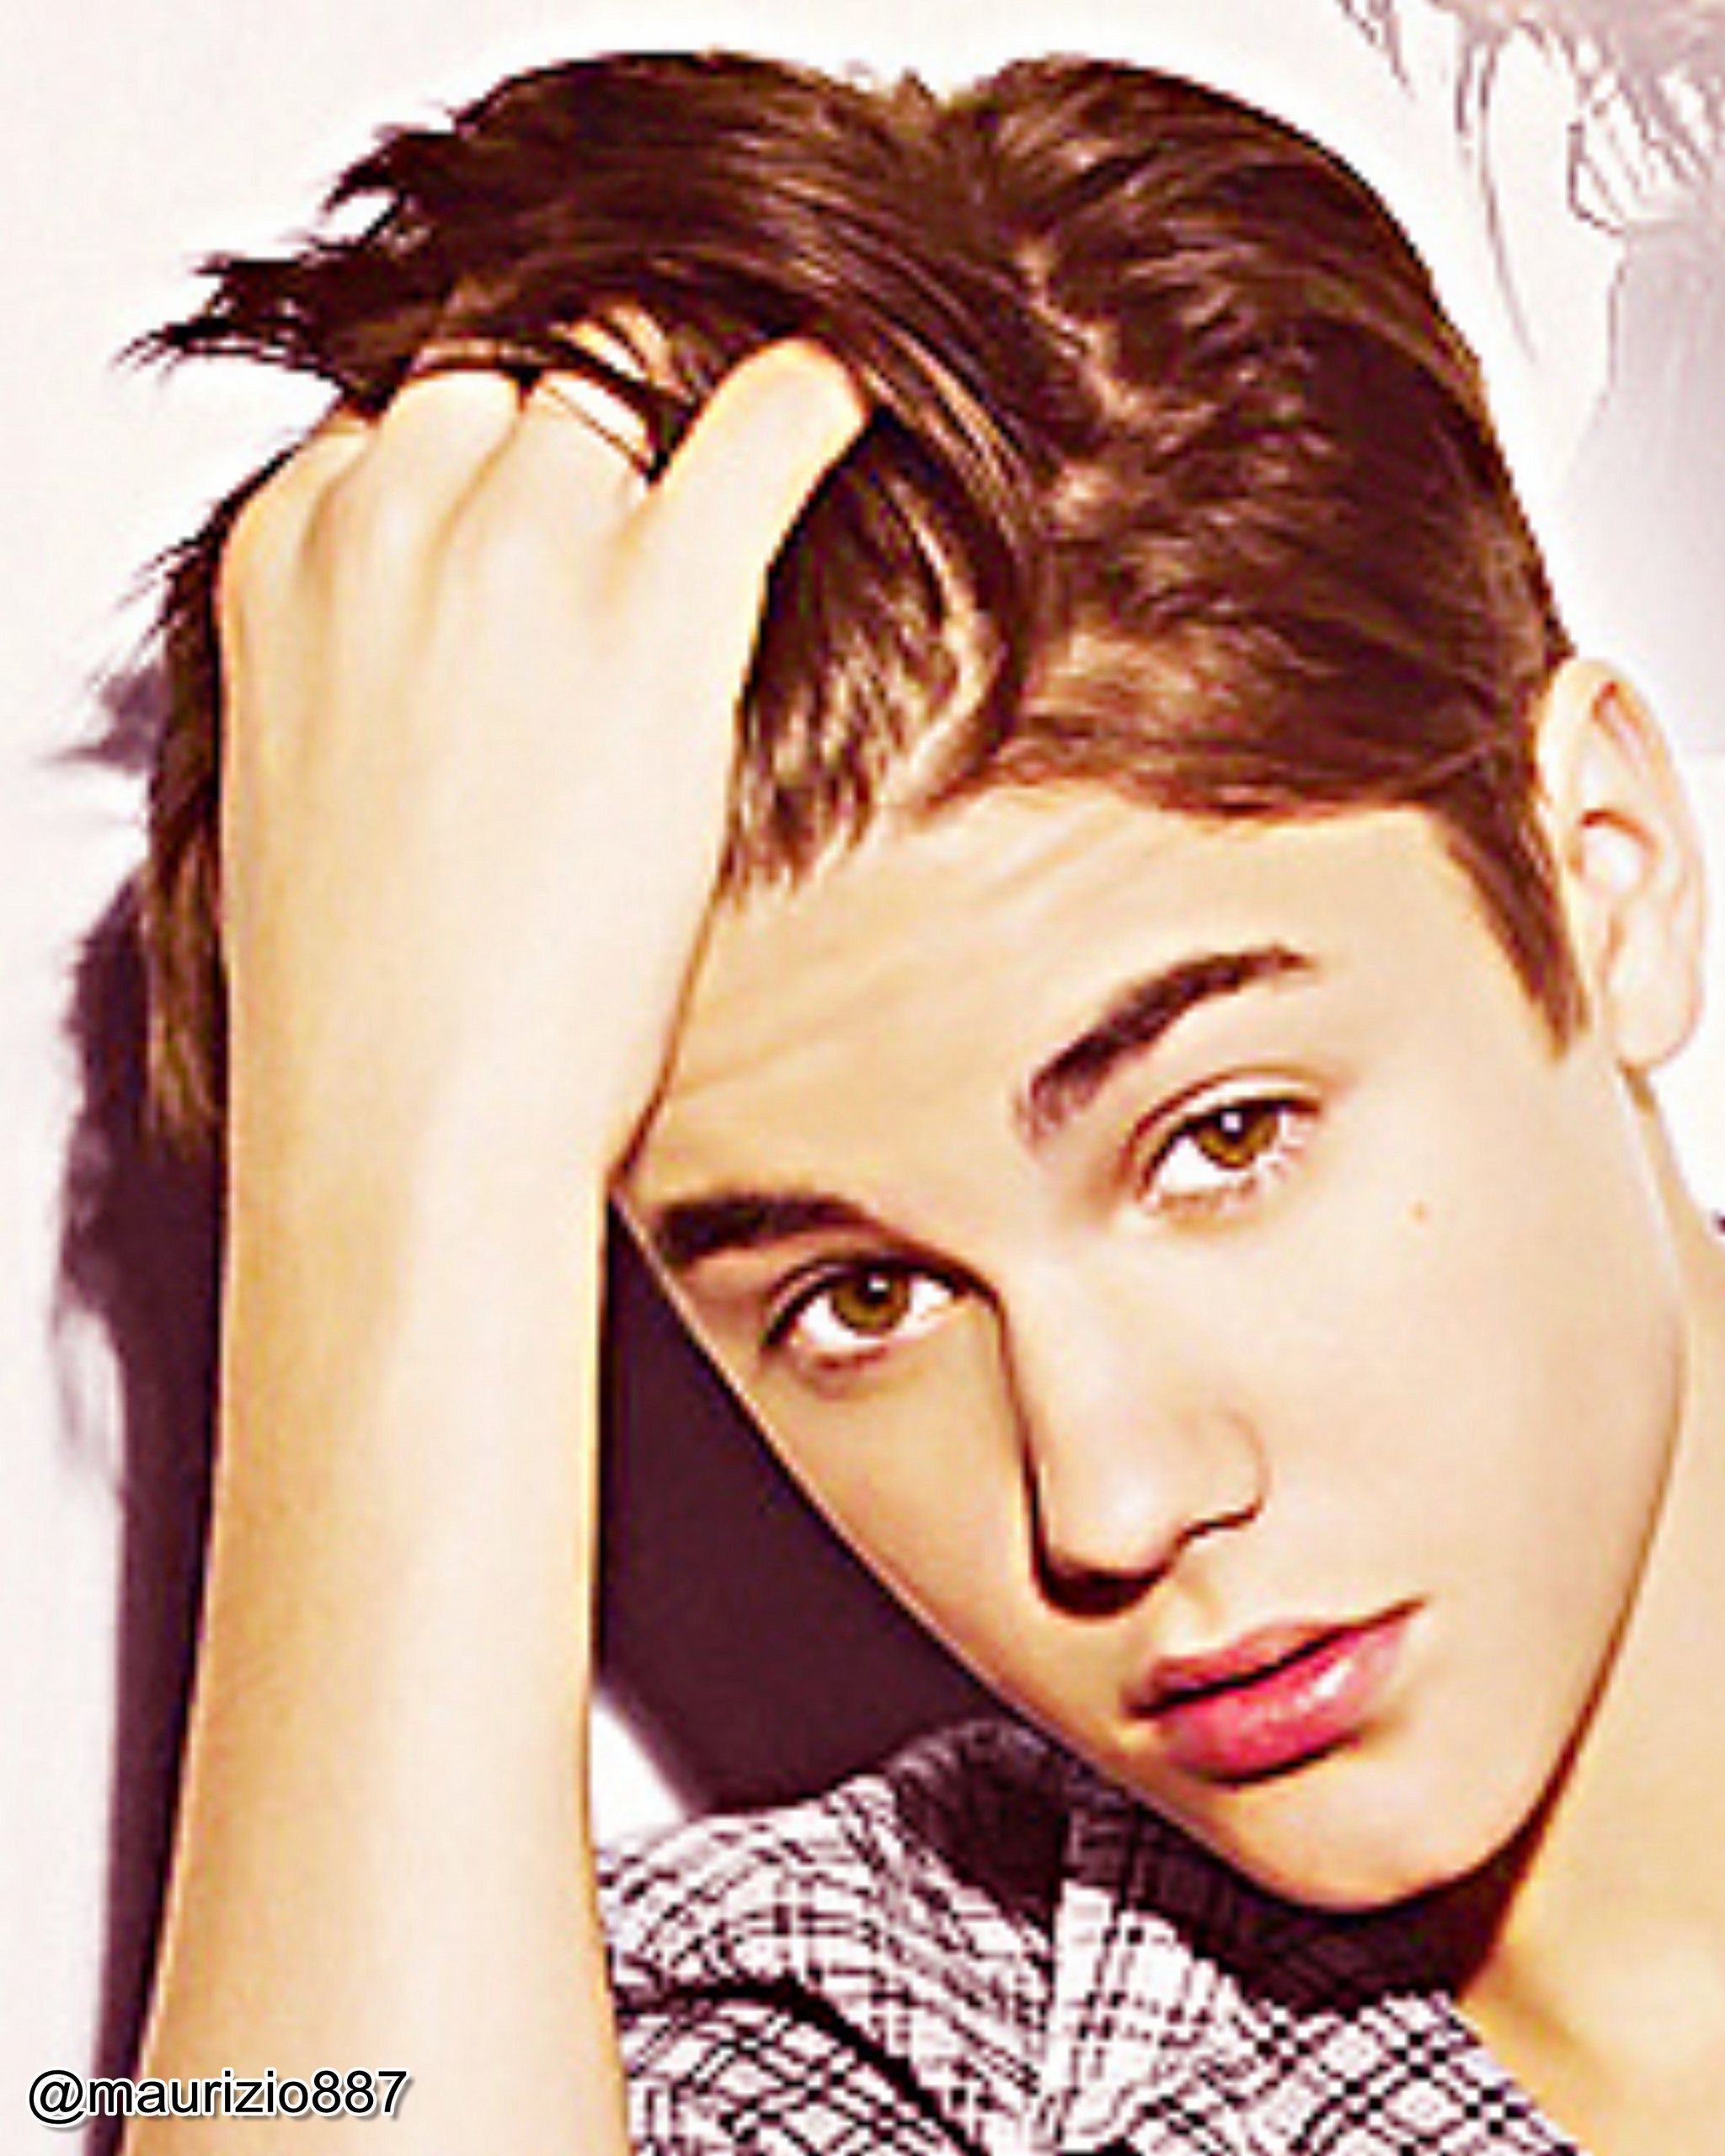 justin bieber HD IMAGES WALLPAPERS. FULL HD WALLPAPERS